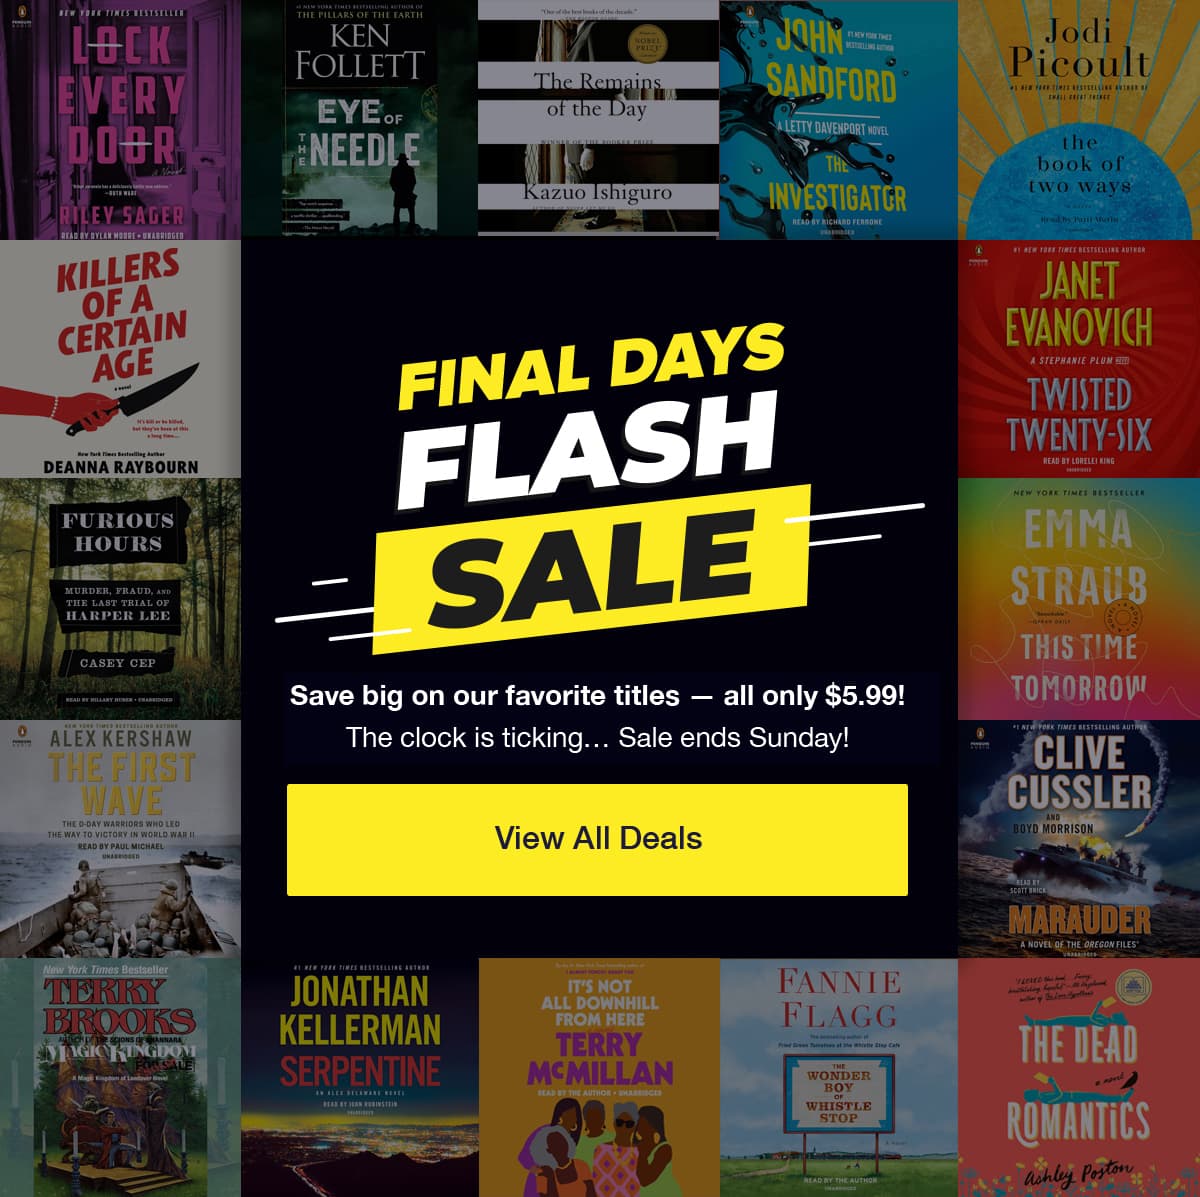 Final Days: Flash Sale on Big Name Authors